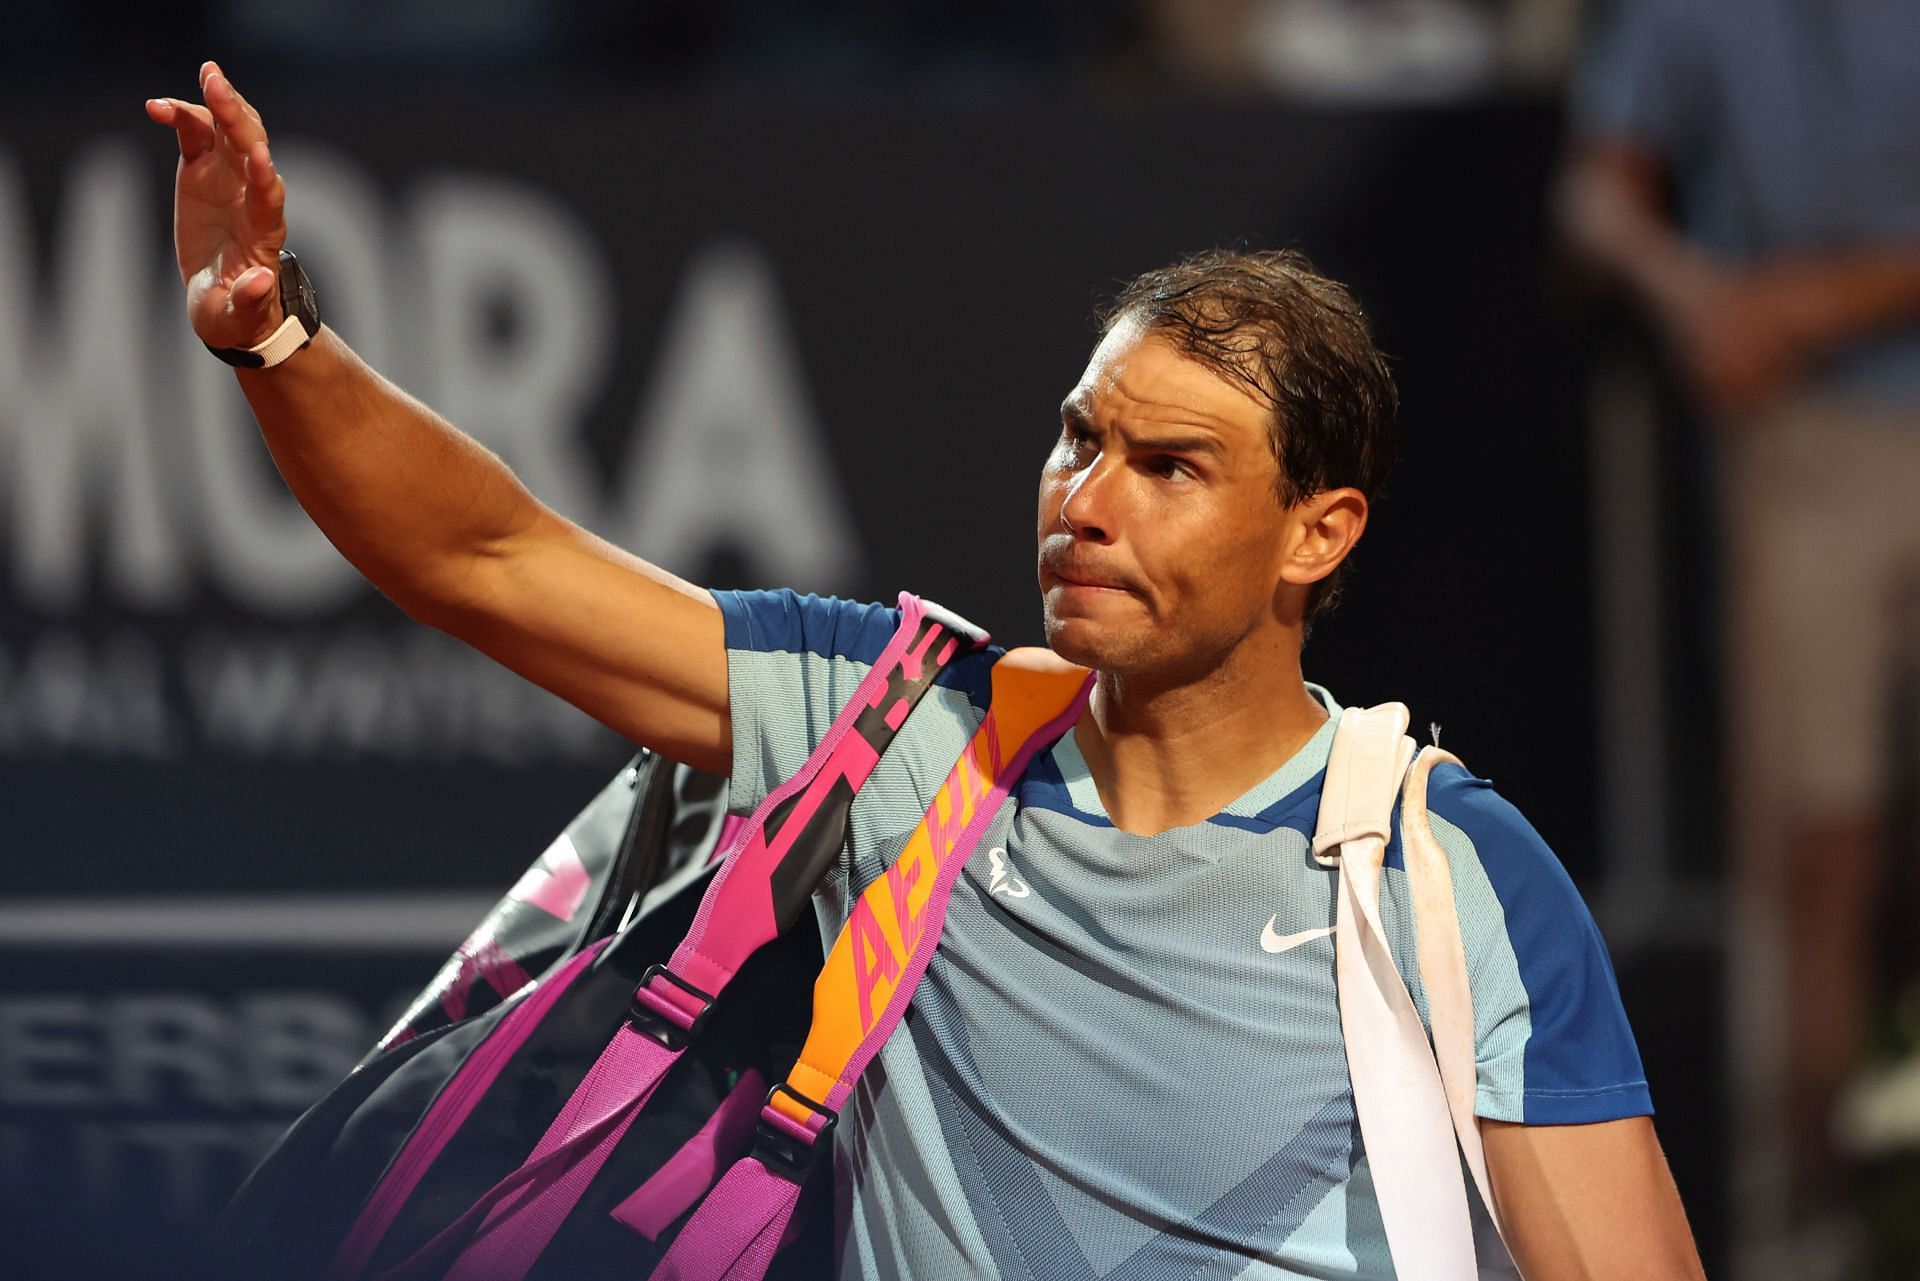 Rafael Nadal suffers from Mueller-Weiss syndrome.